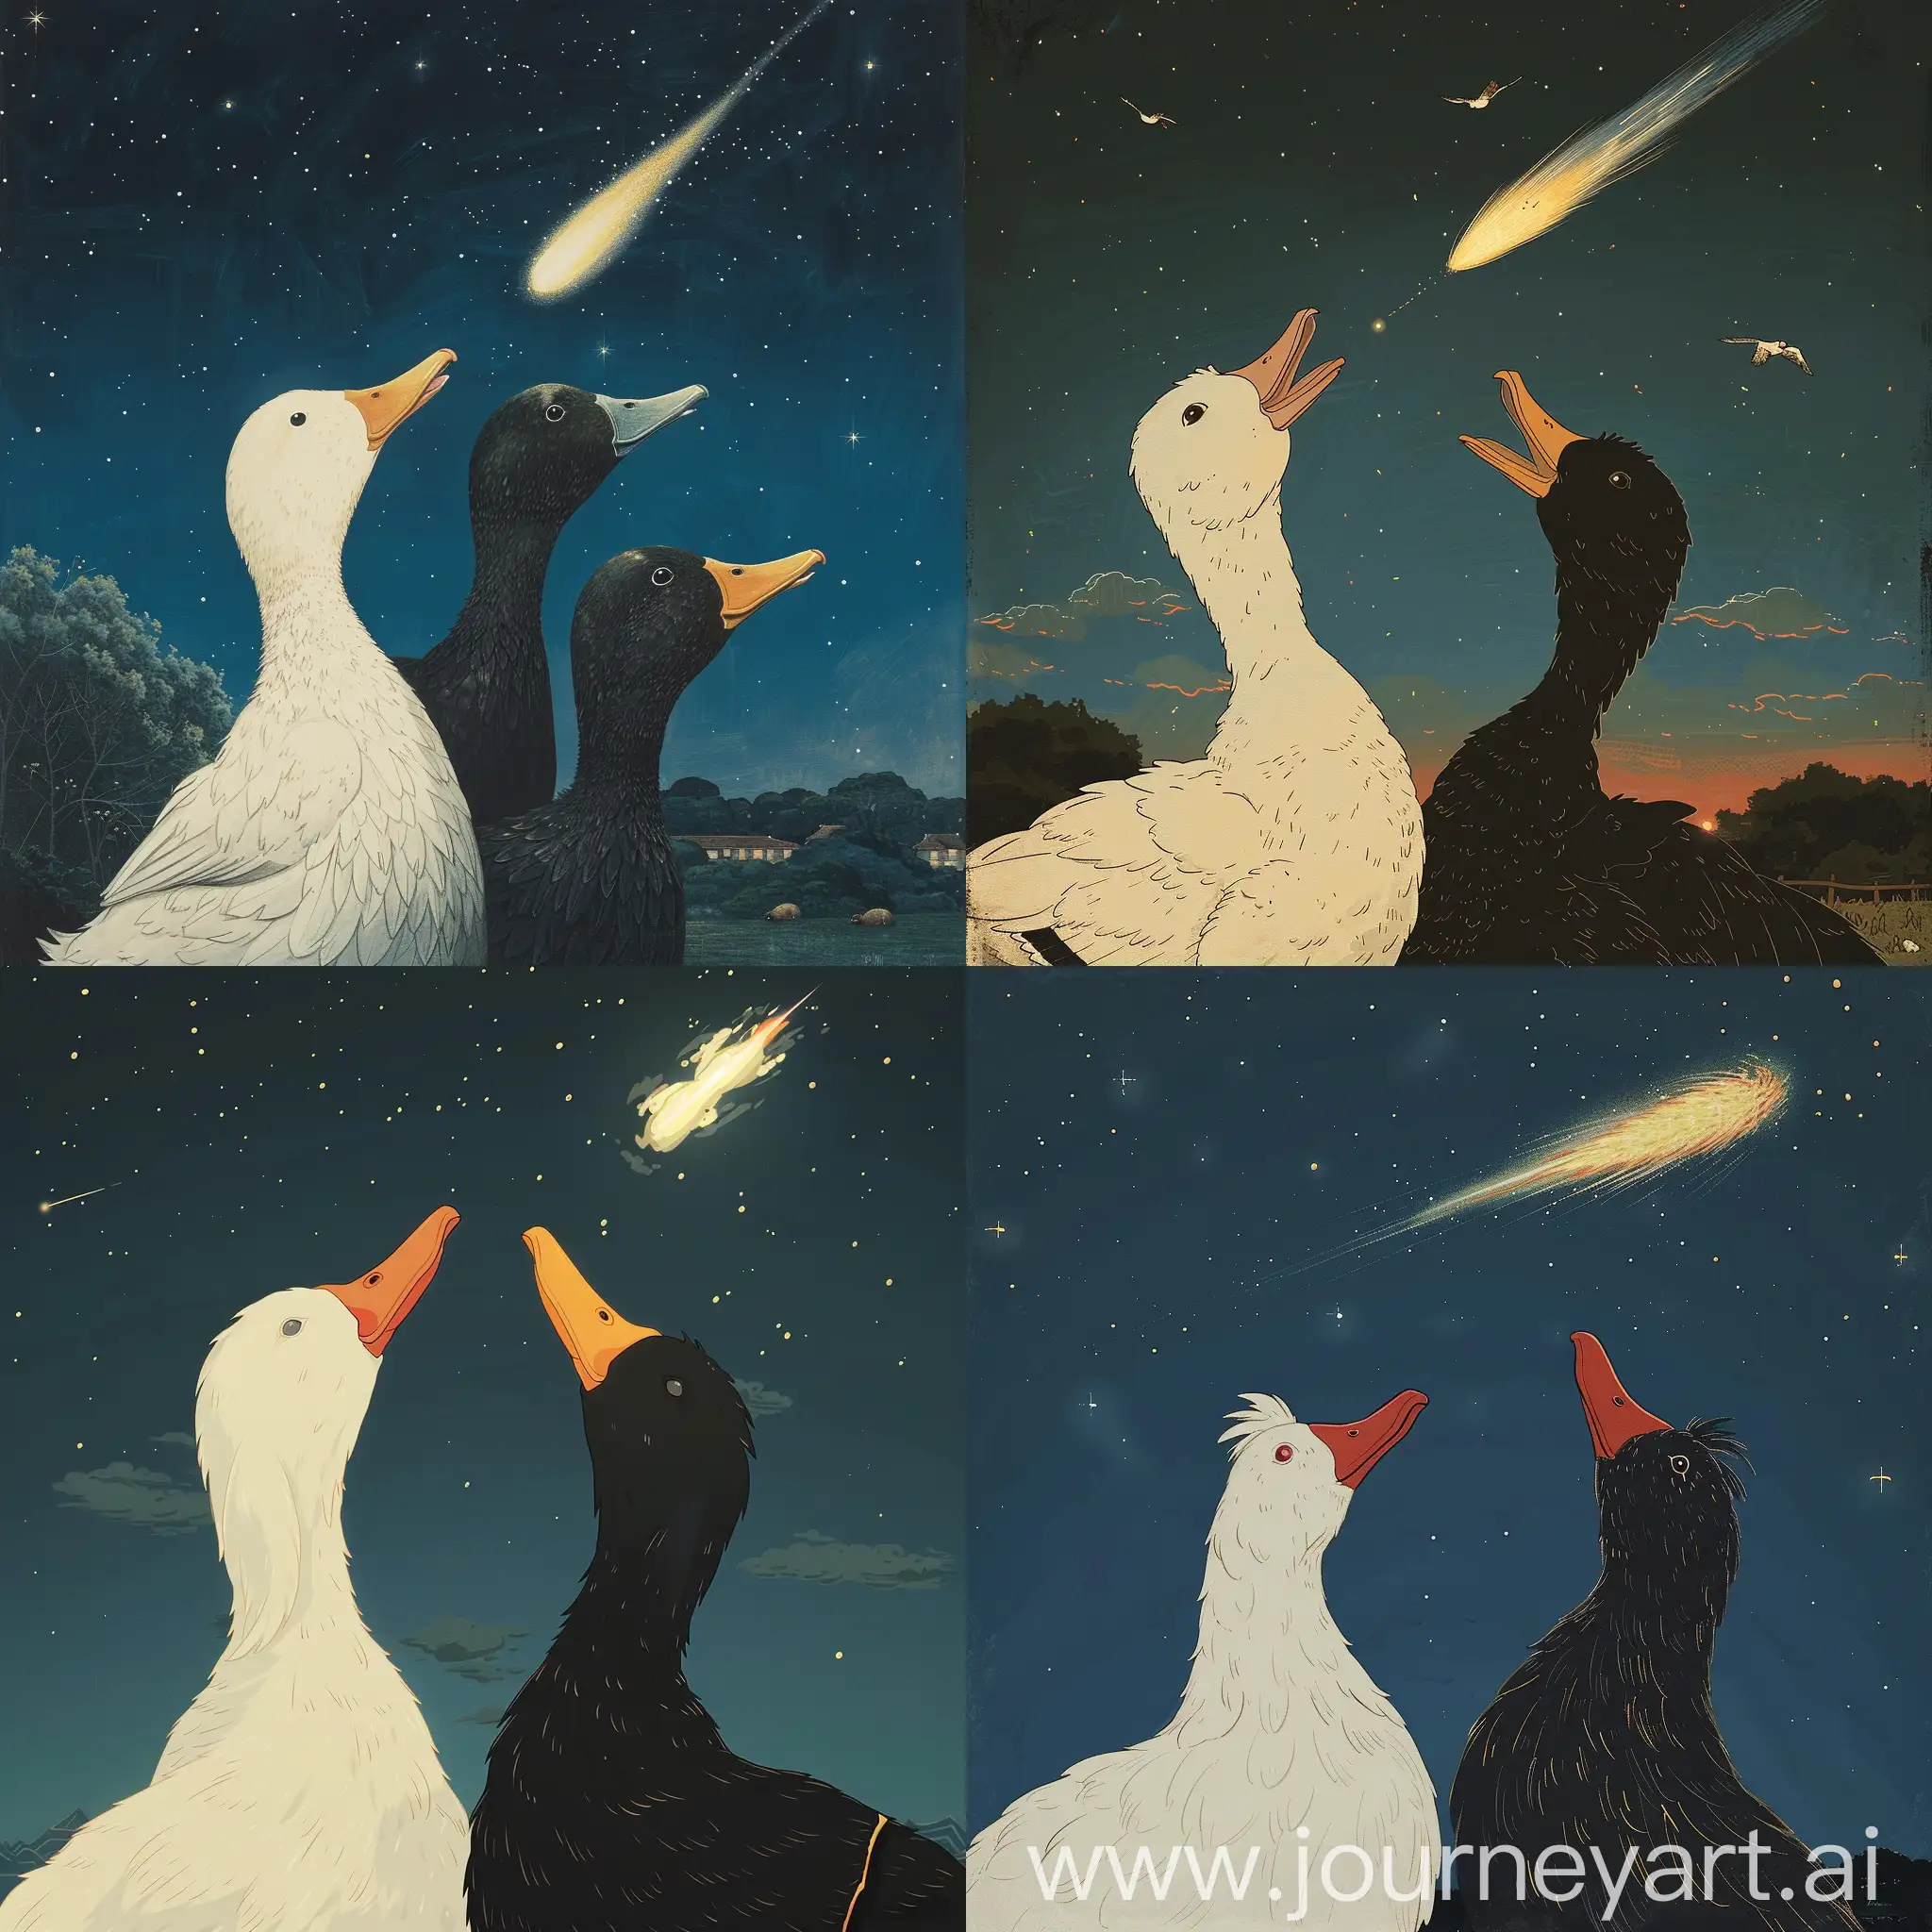 an illustration featuring two ducks, one white while the other black looking up at a meteor passing over their heads at night in the style of Hasui Kawase 